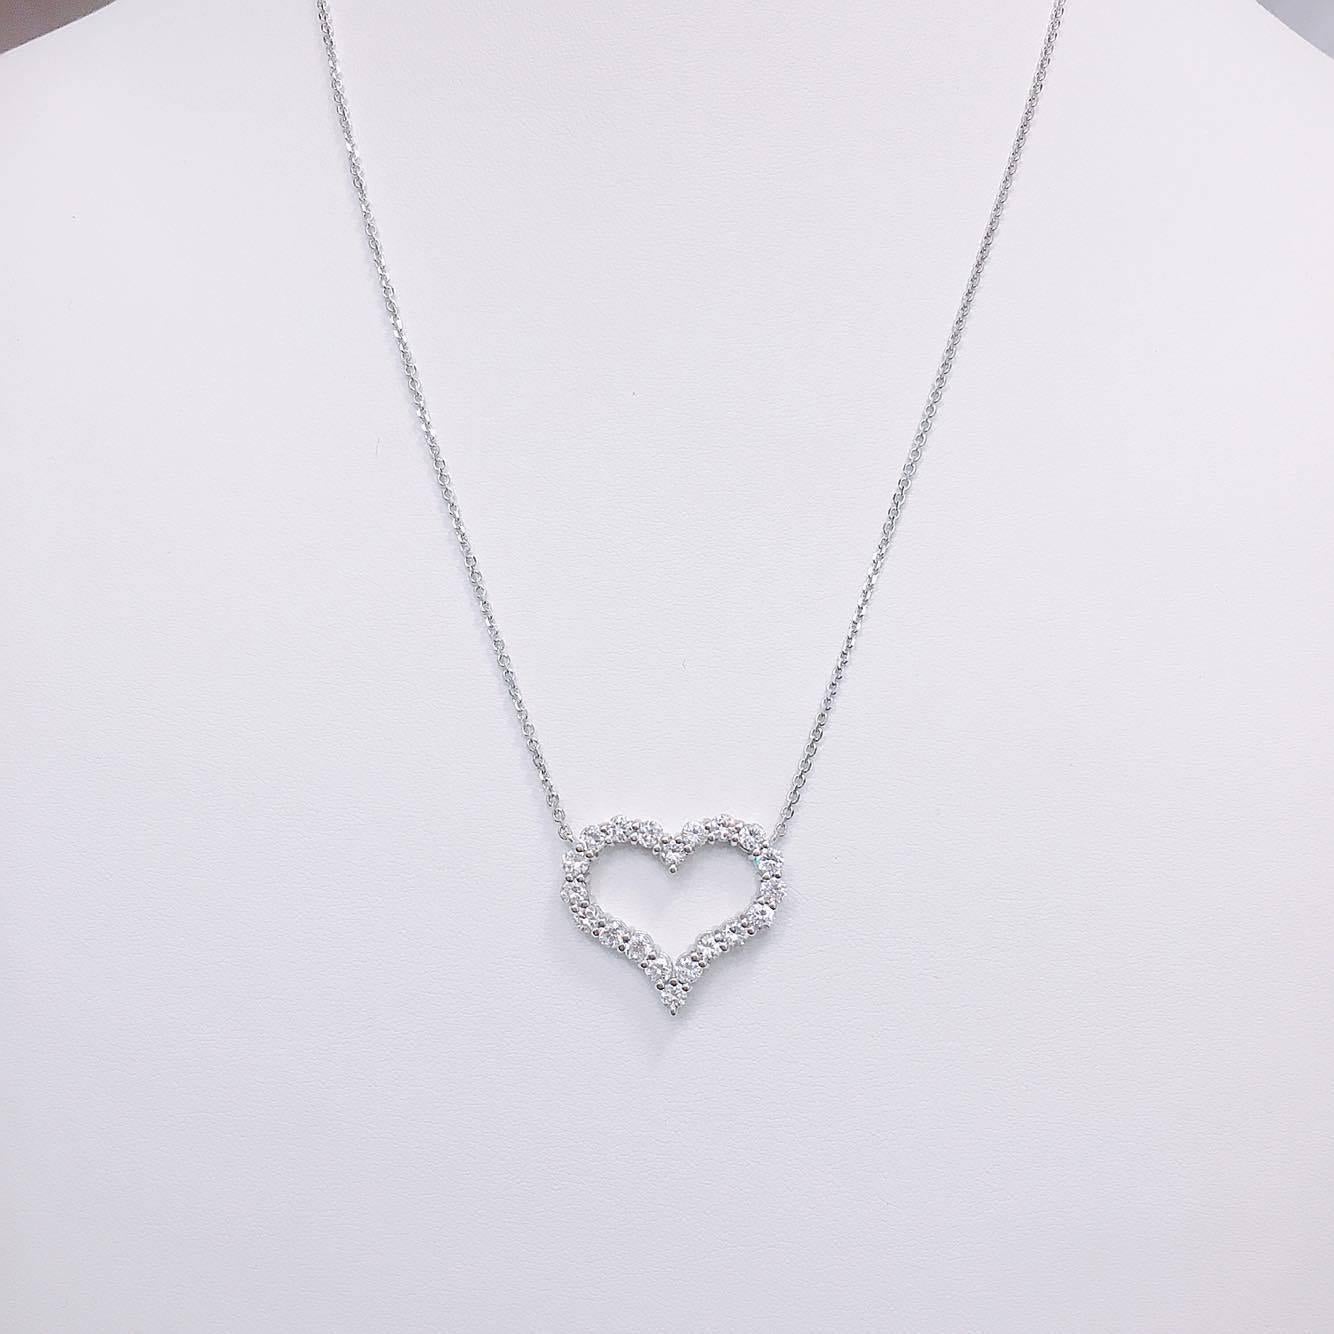 Approx. 2.00 carats total weight diamonds.The finest conflict free diamonds set in our unique diamond necklace. (Standard length is 17inch- 18inch, however we can alter this necklace to any size). 
Can be ordered in 14k or 18k white/yellow/rose gold